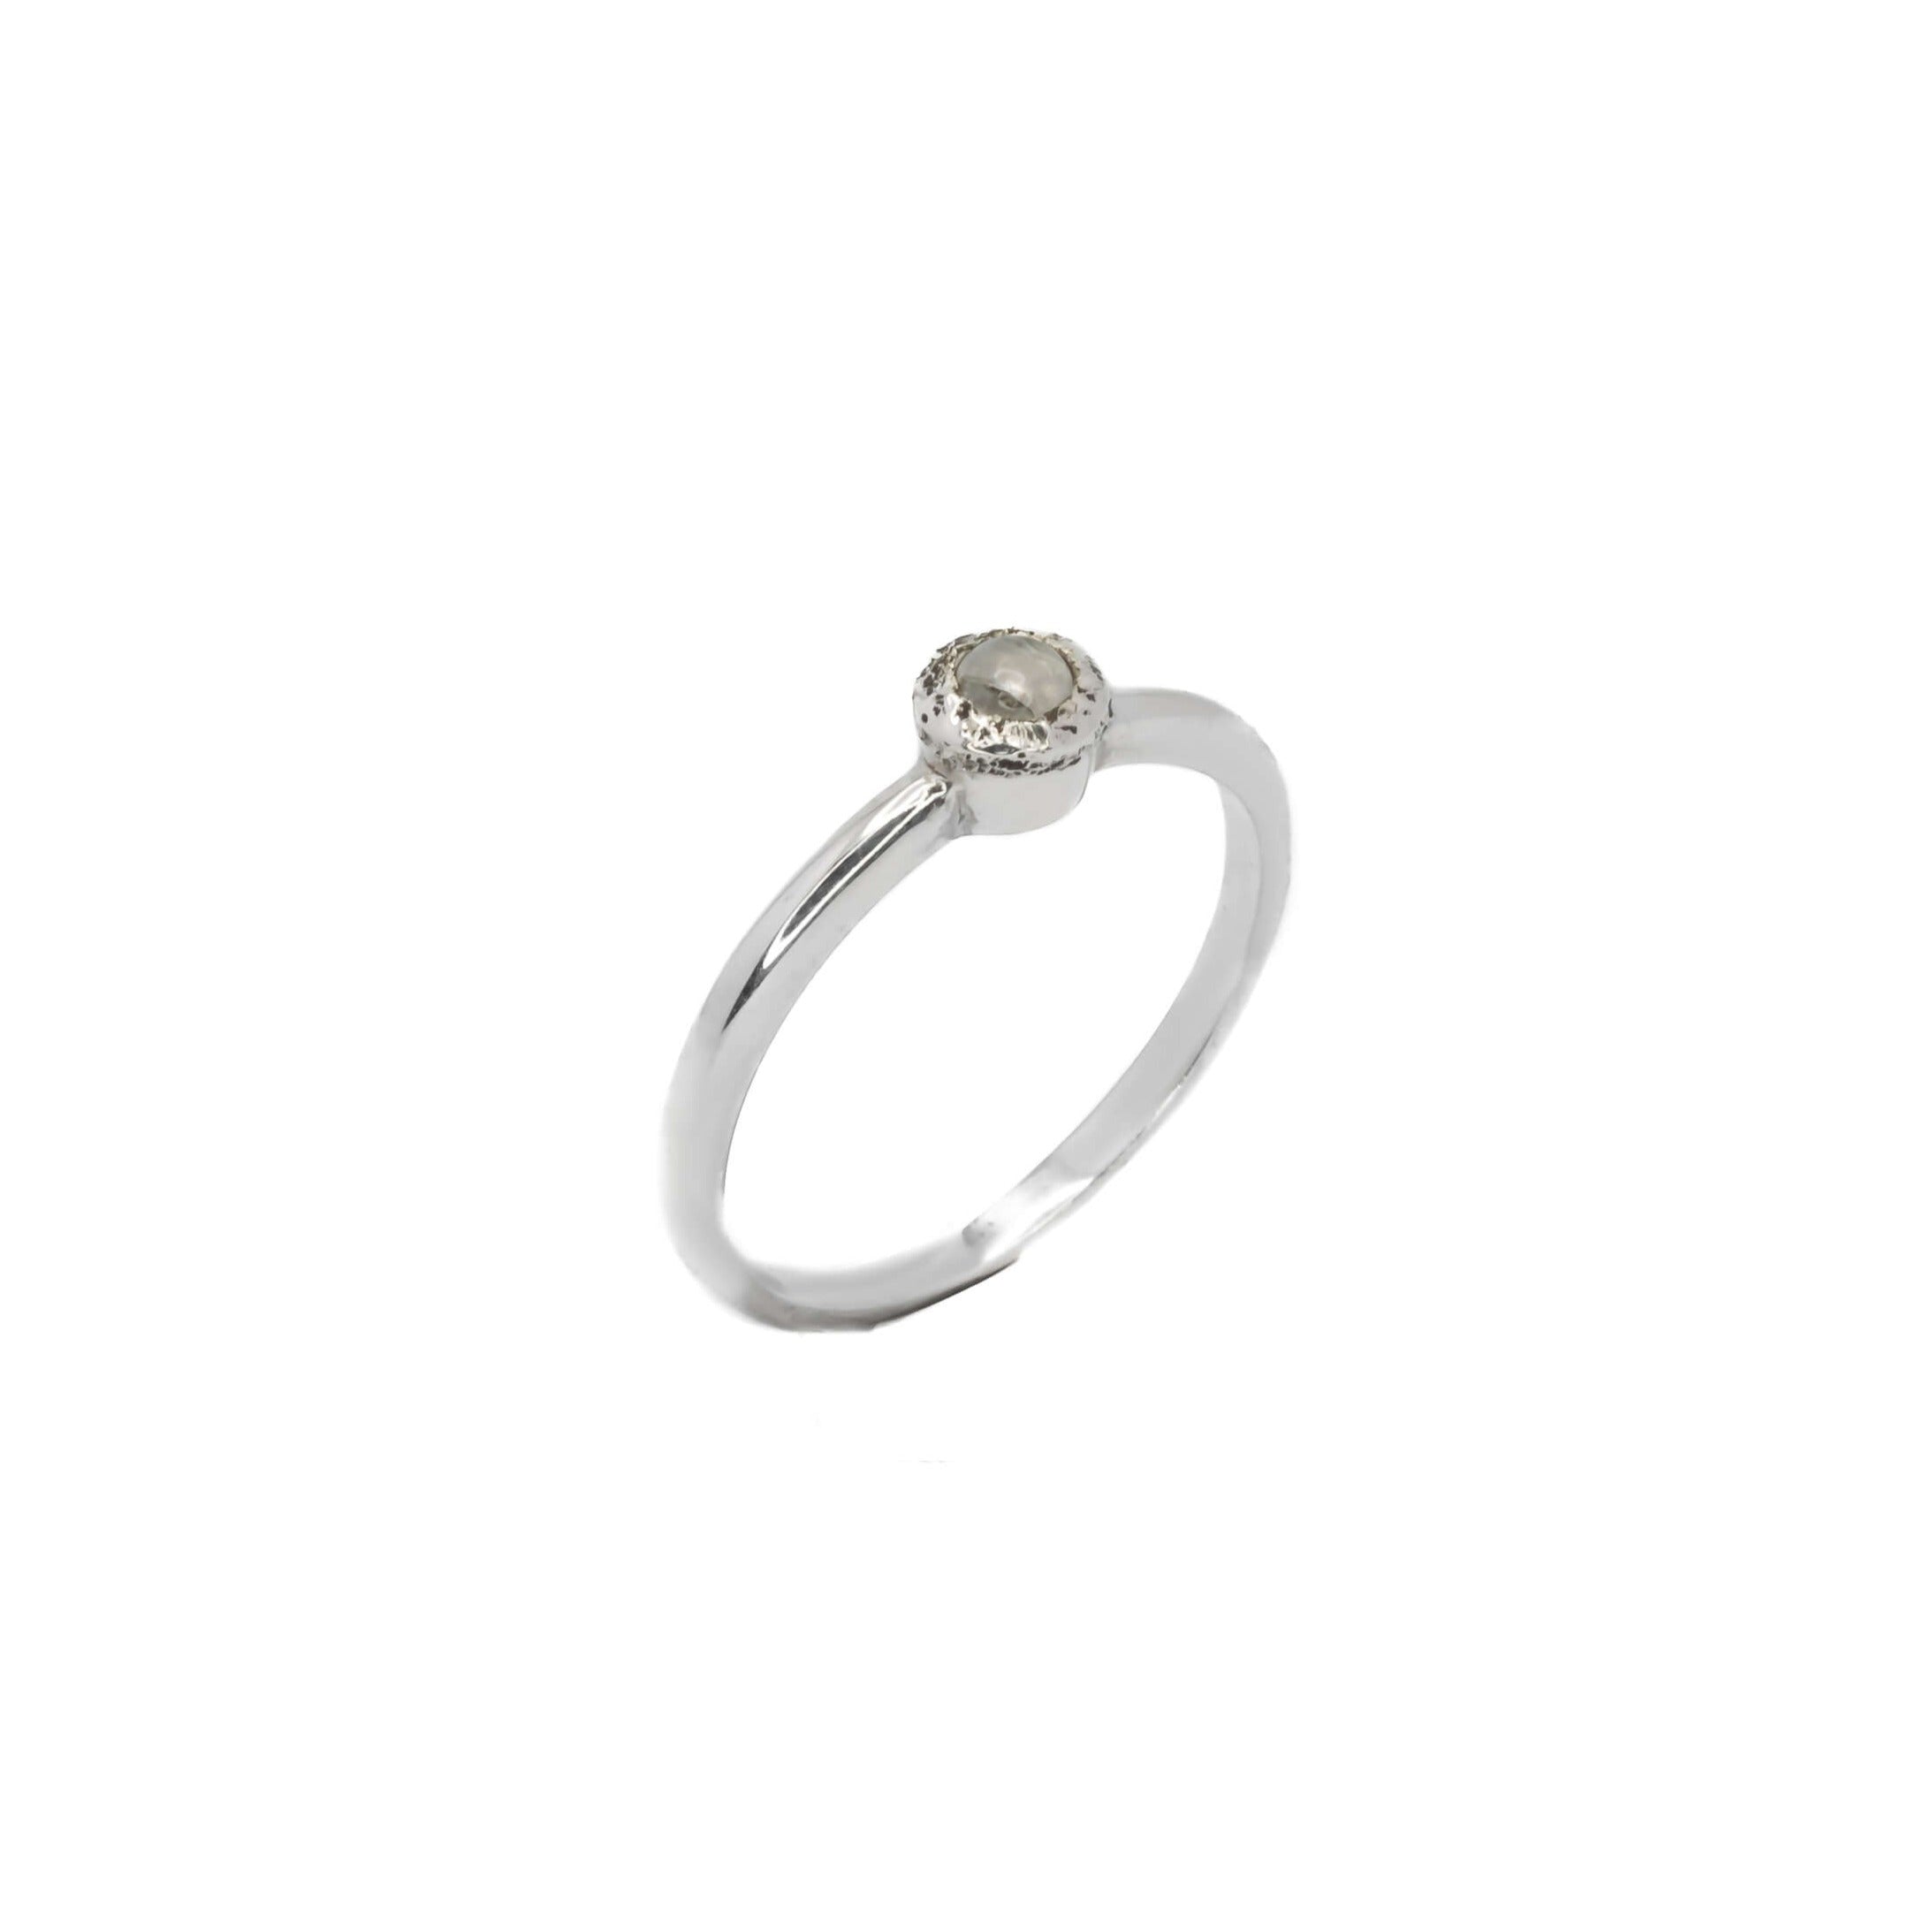 Moonstone sterling silver stackable ring